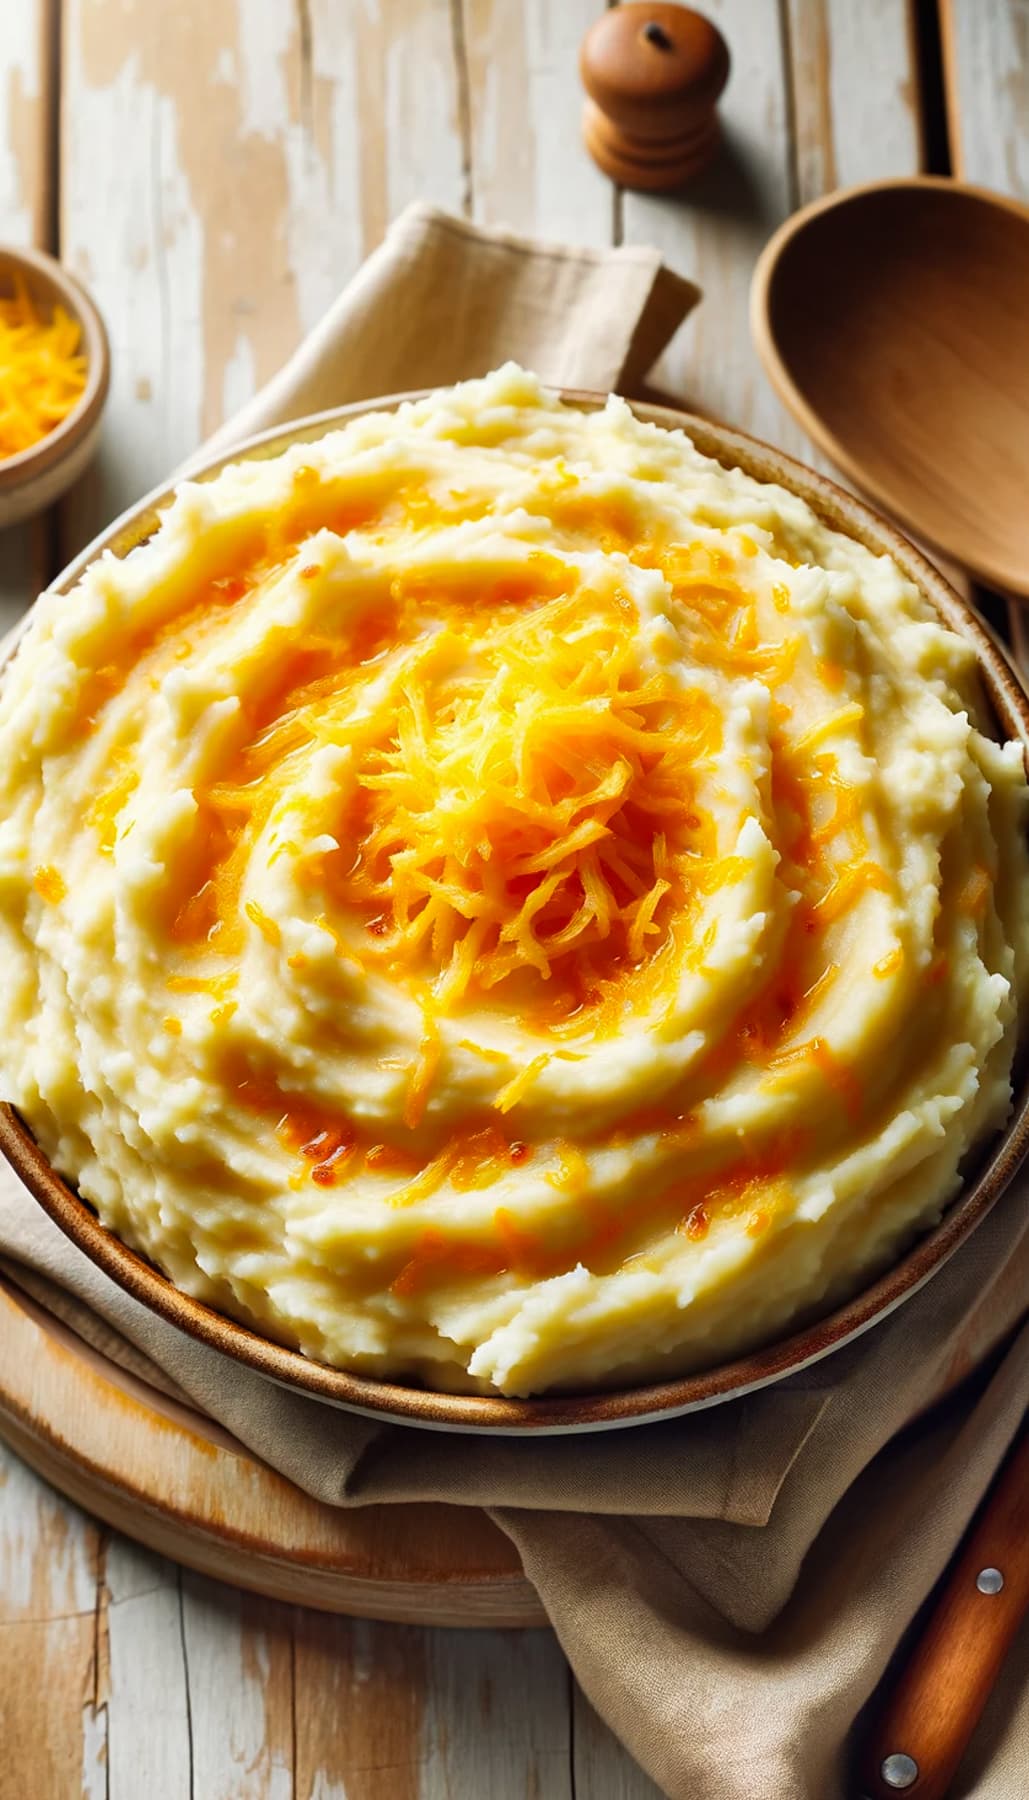 A big serving bowl filled with fluffy mashed potatoes, topped with melted cheese, and placed on a light, worn-out wooden surface.